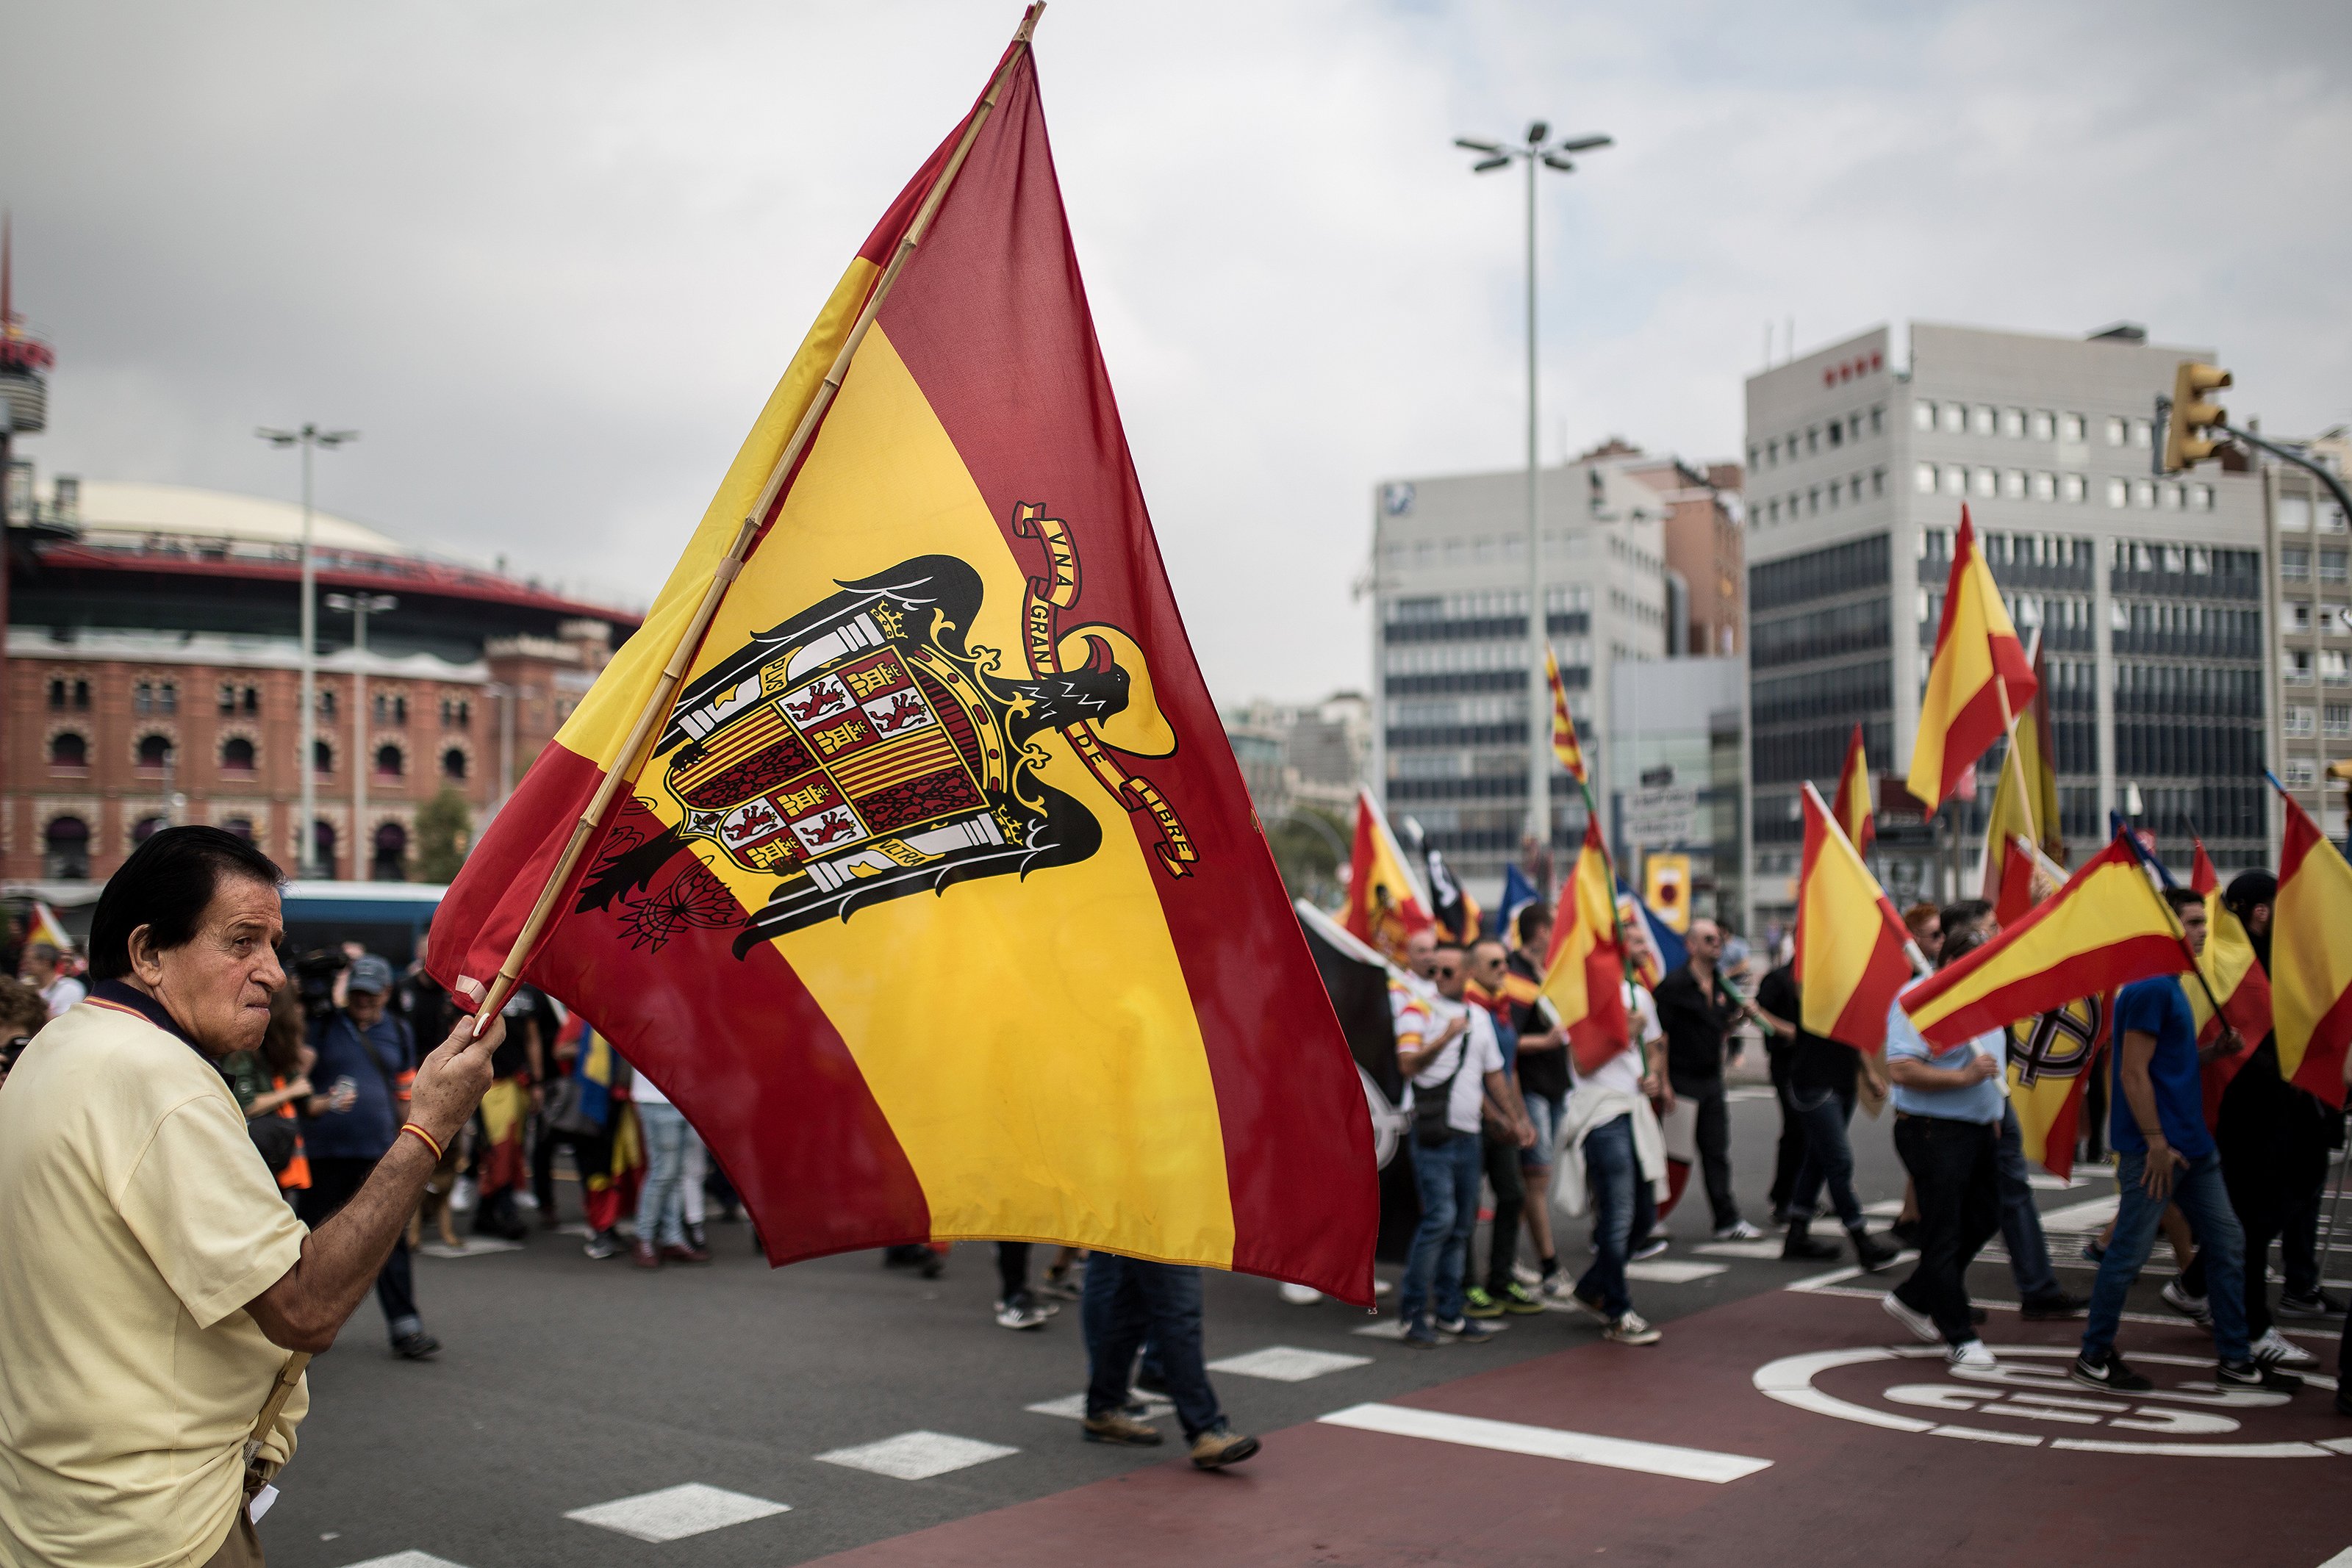 326 politically-motivated hate crimes reported in Catalonia in 2018